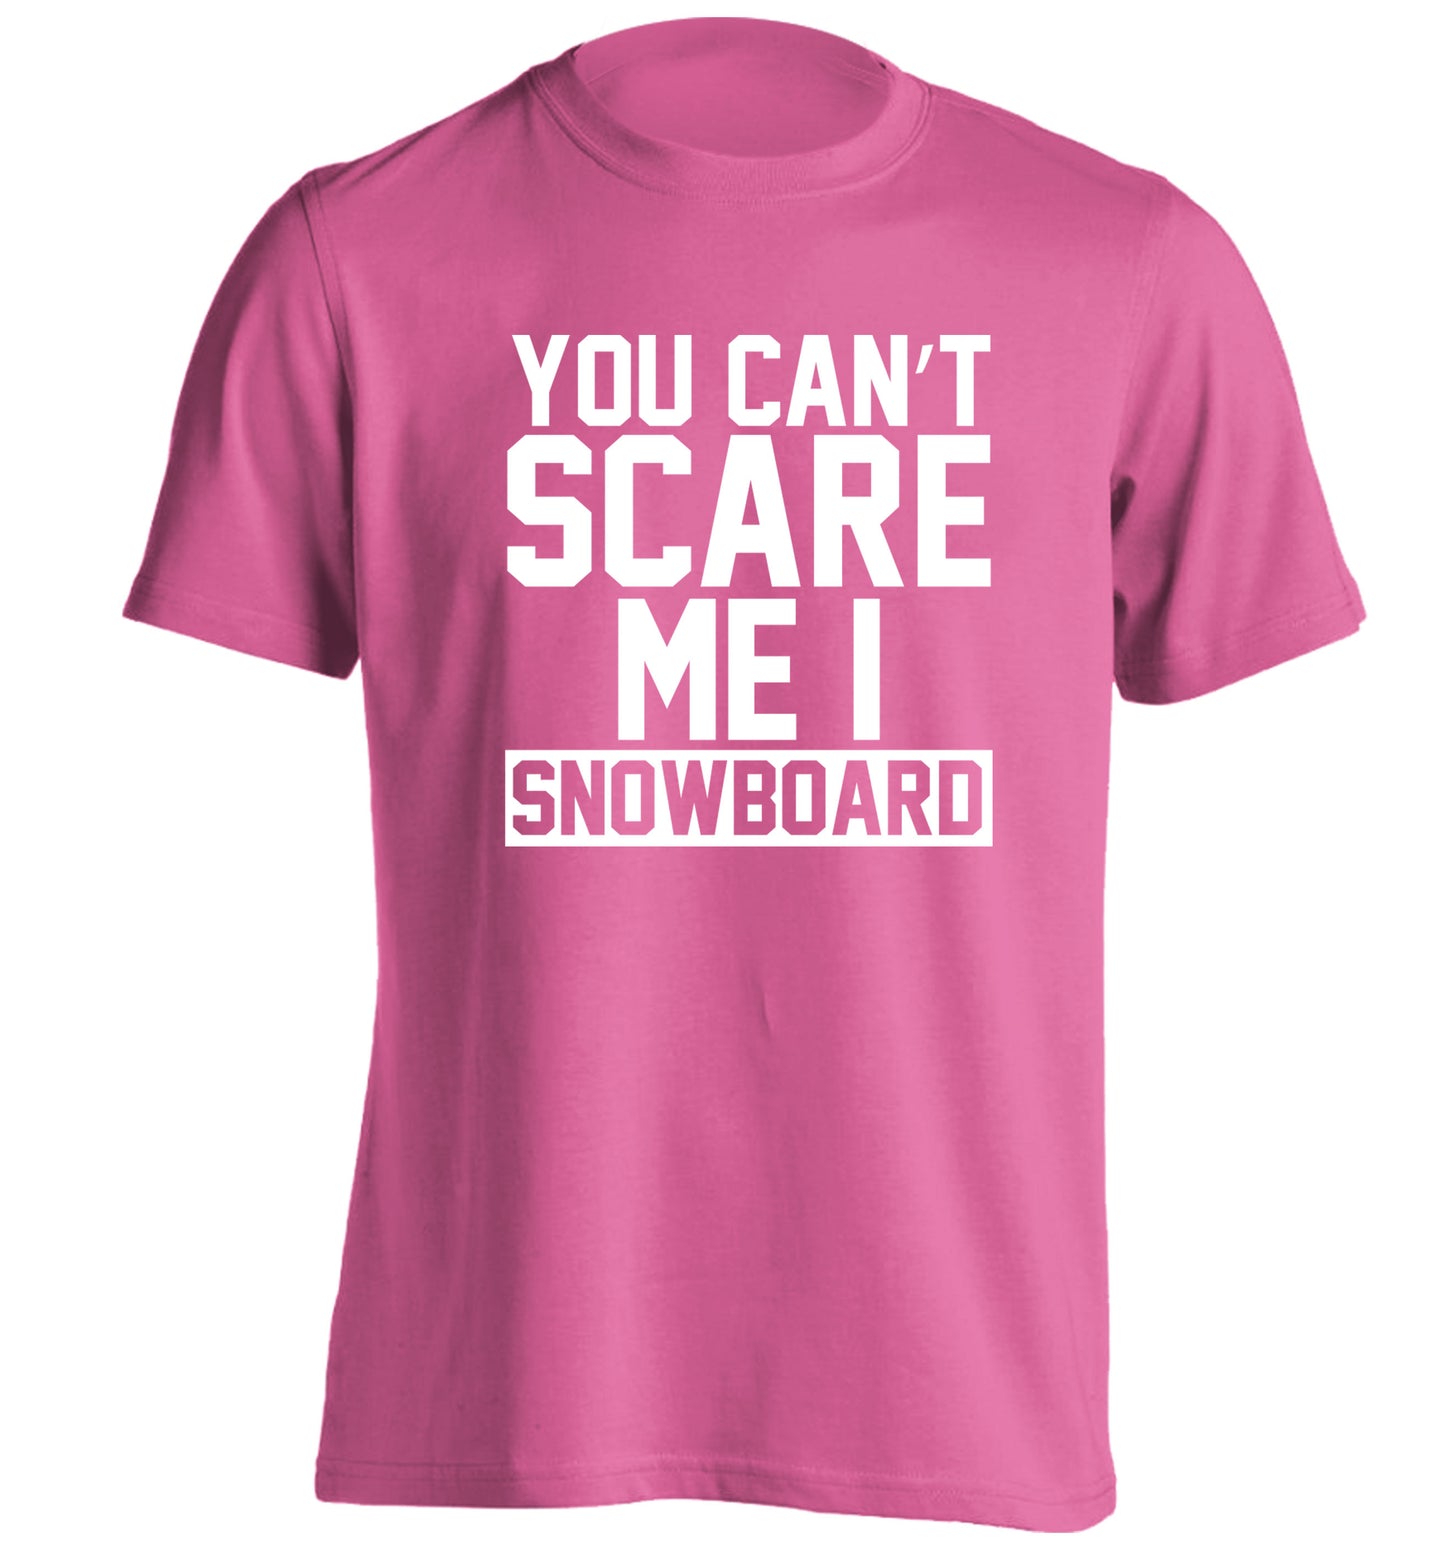 You can't scare me I snowboard adults unisex pink Tshirt 2XL